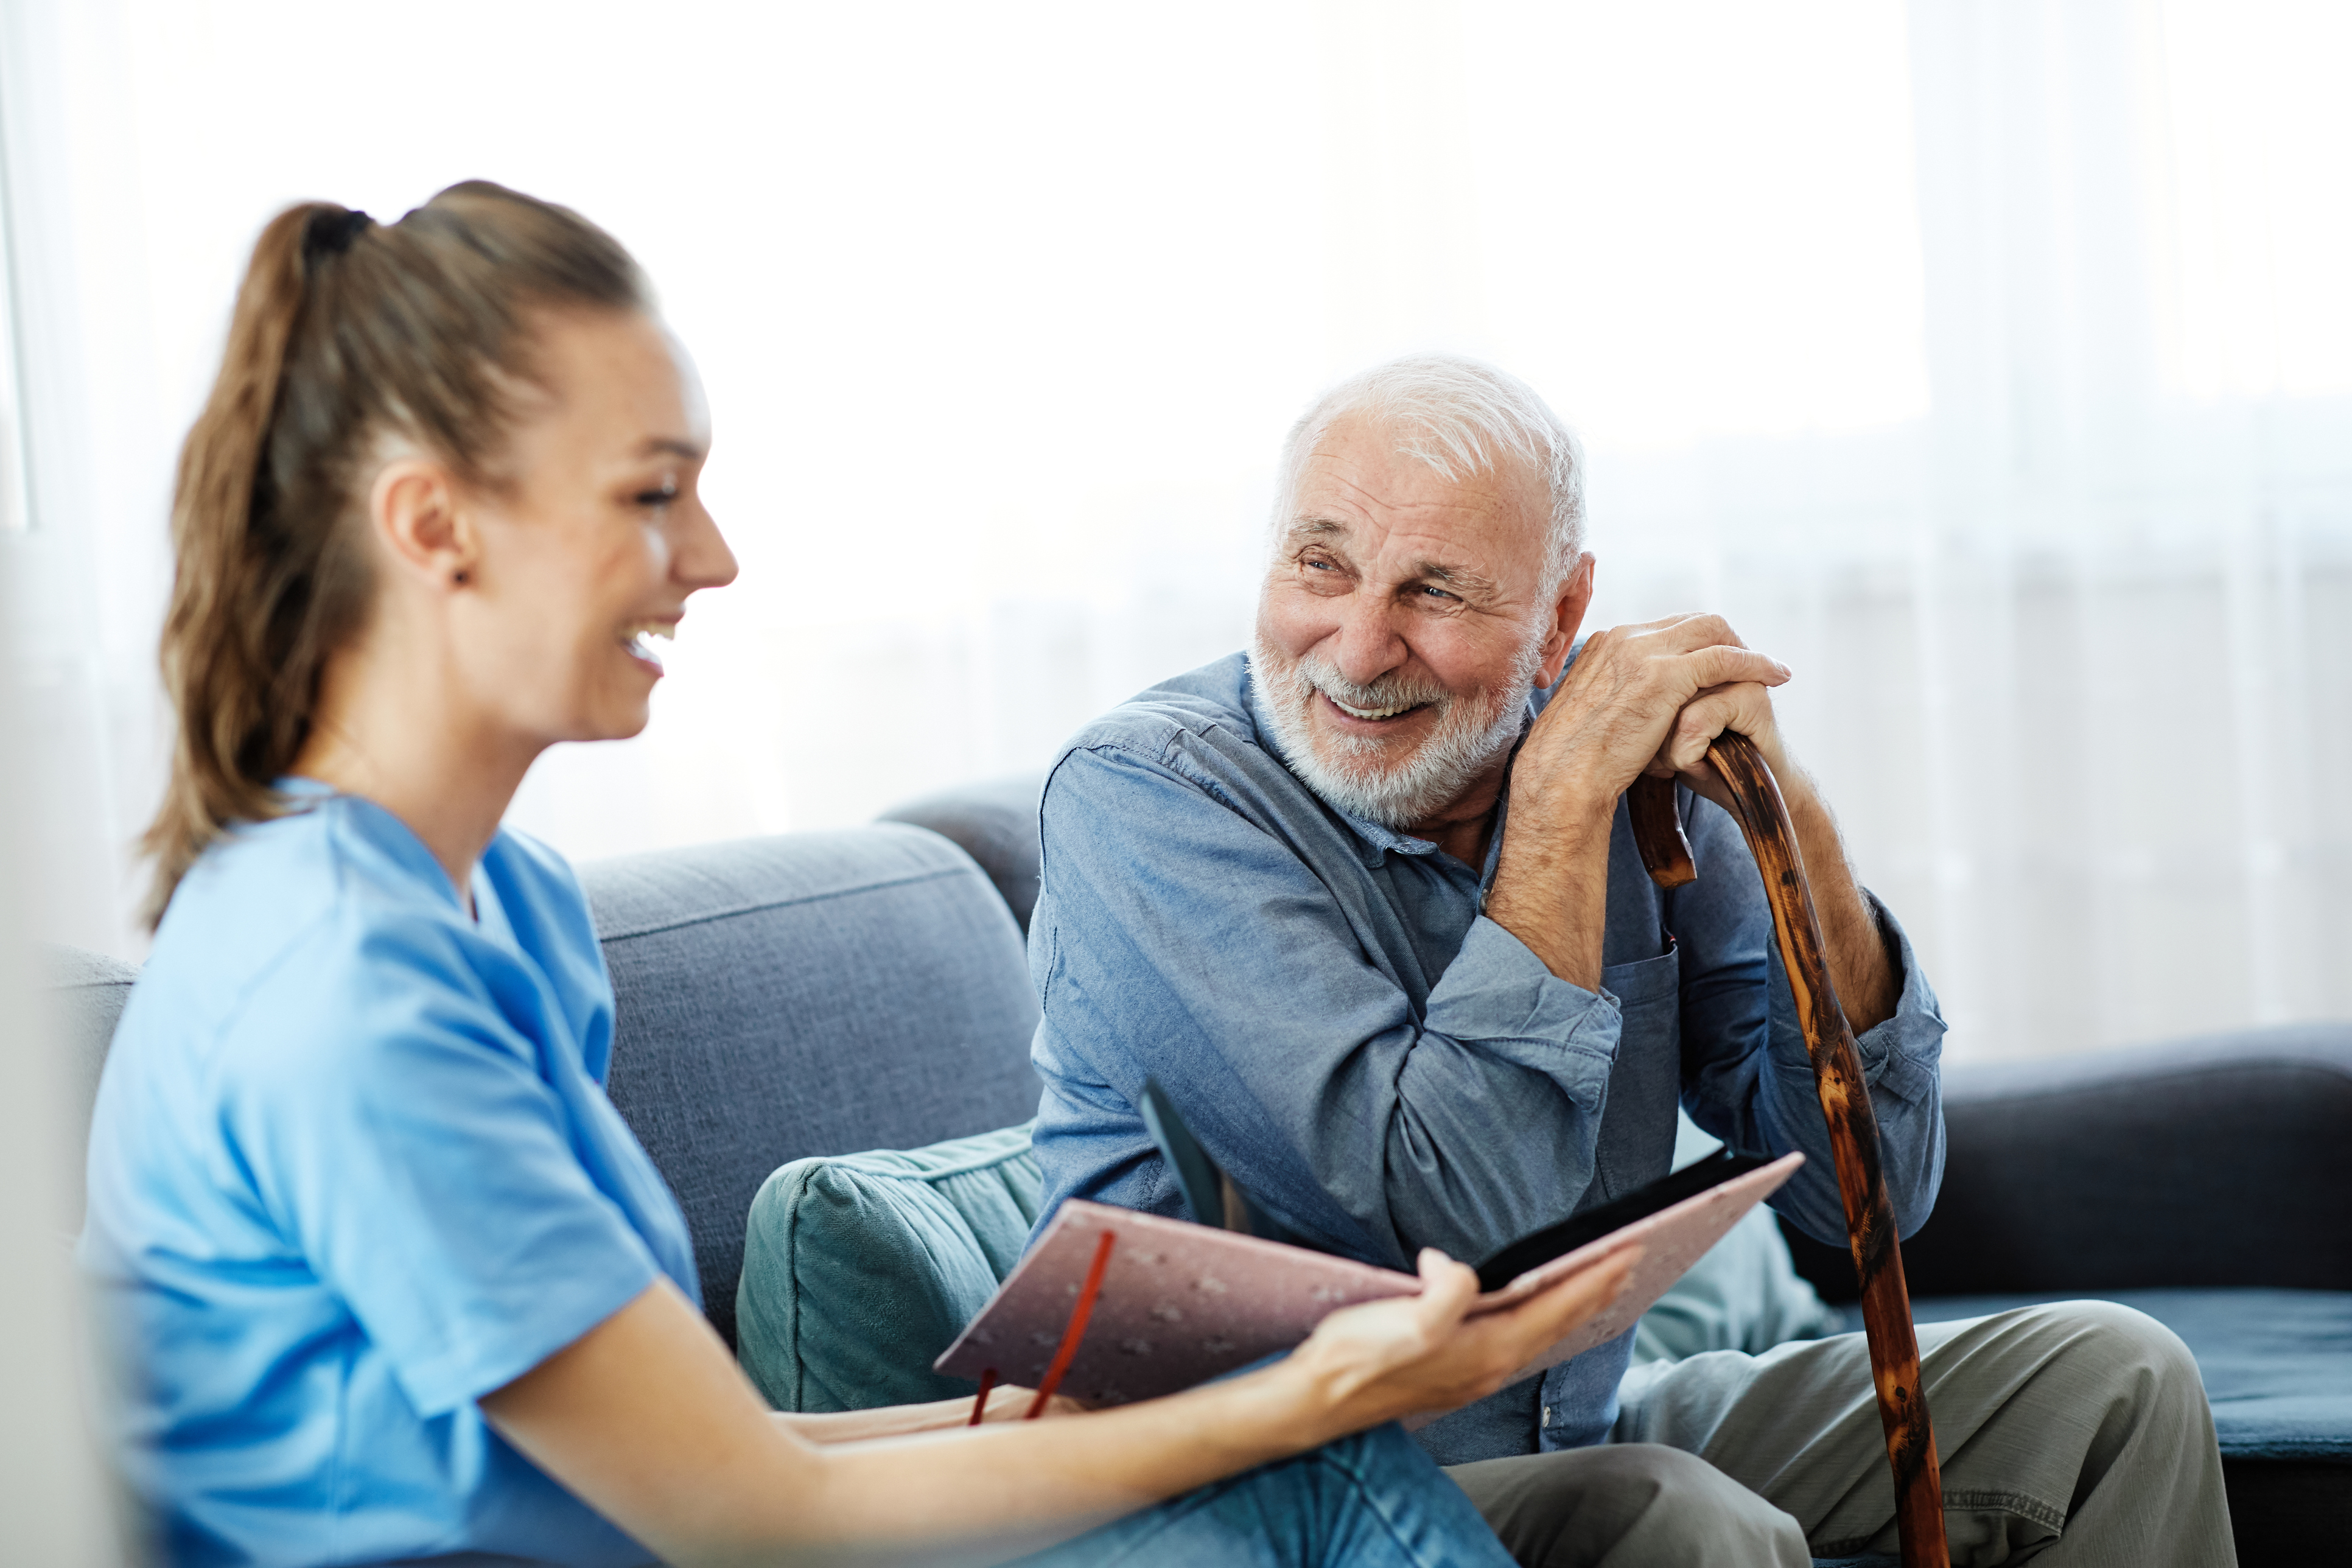 An elderly man laughs with a younger woman in Nurse scrubs - The Benefits of In-Home Nursing - Focus Care